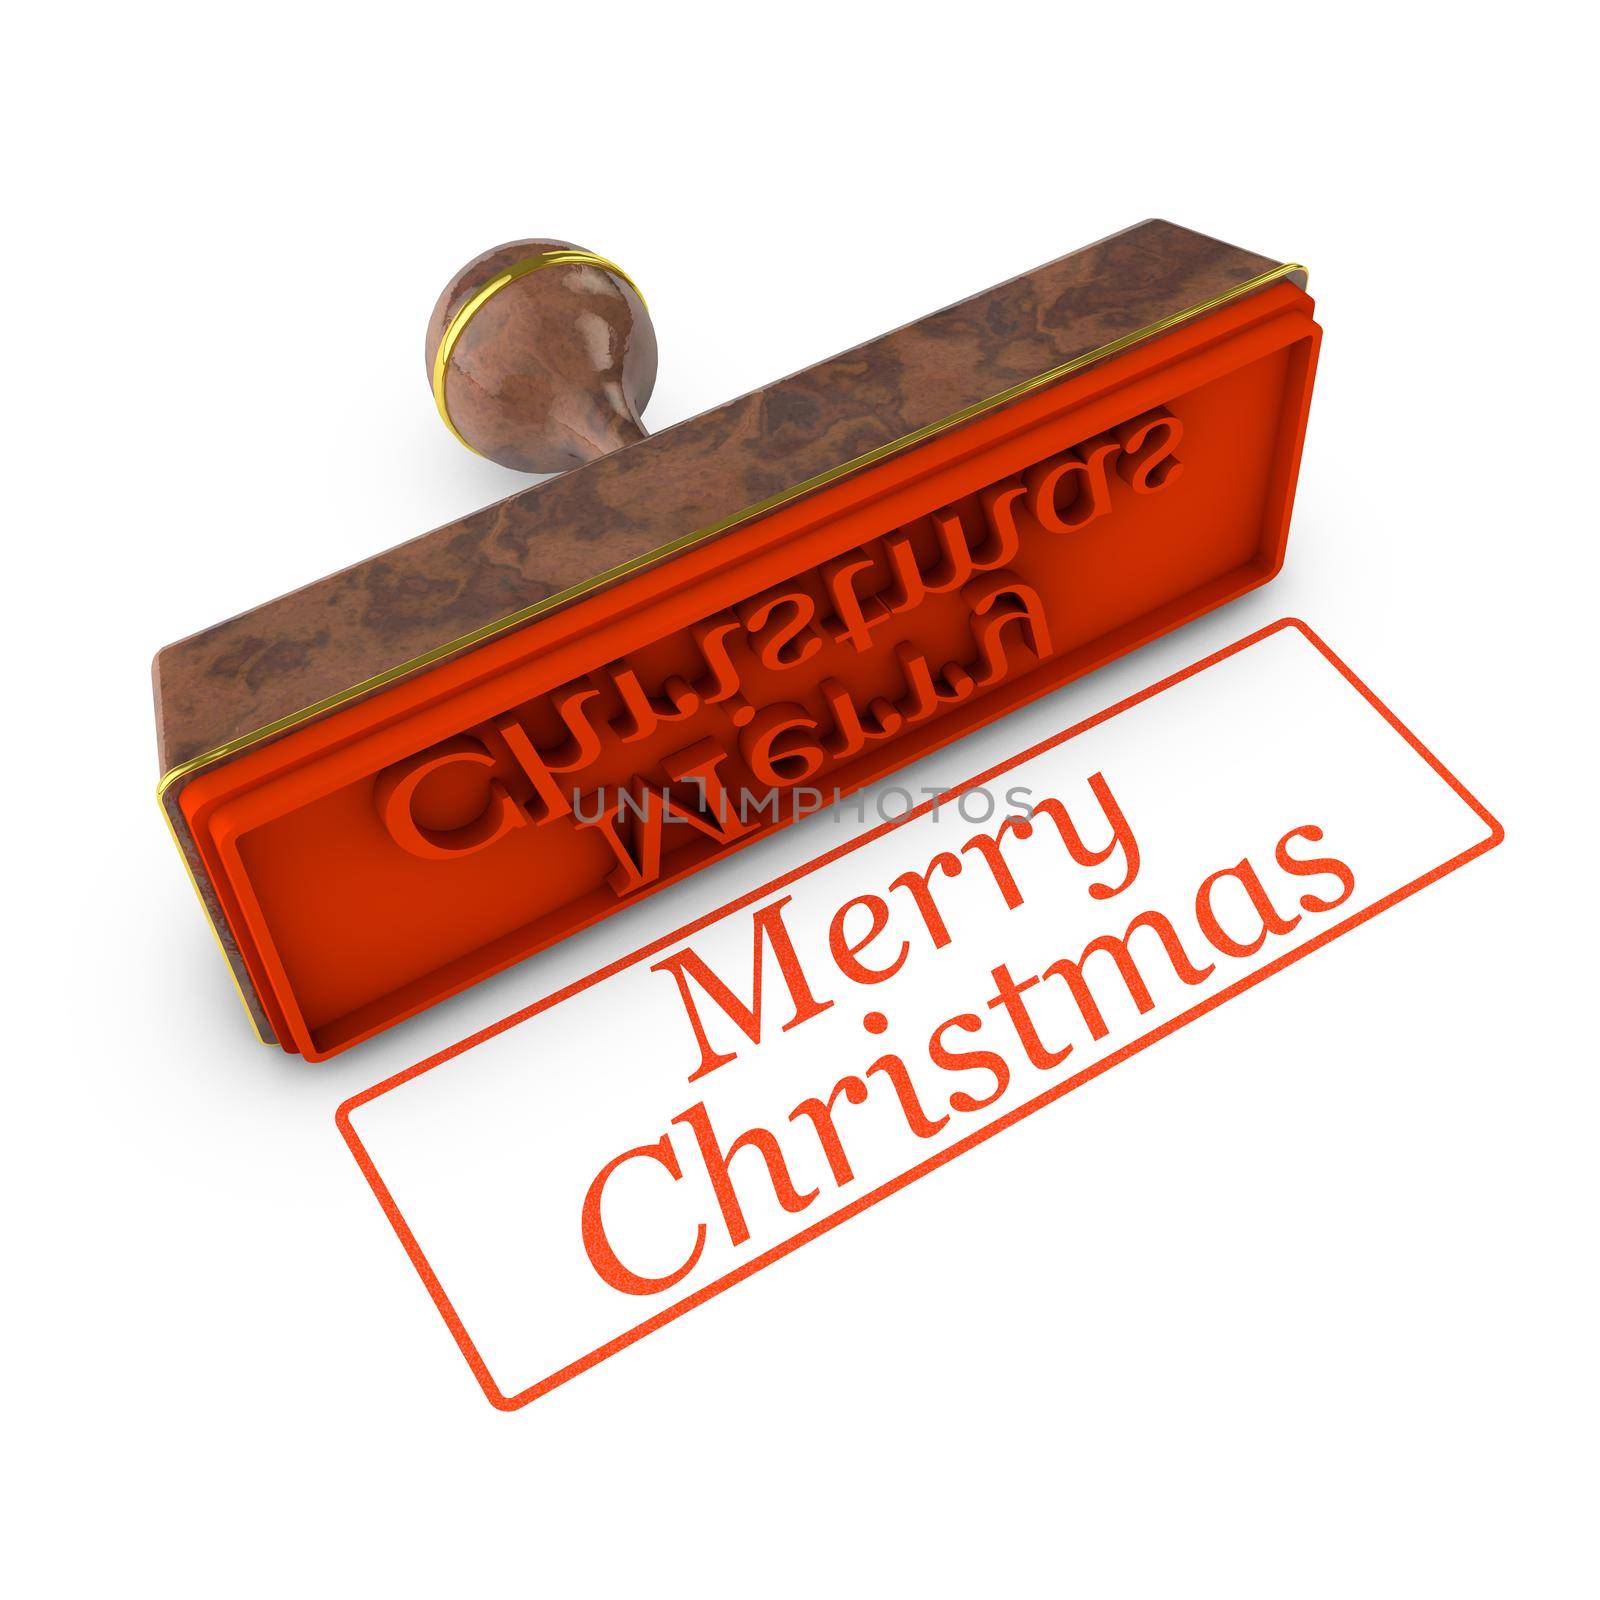 Merry Christmas stamp and imprint on the white background